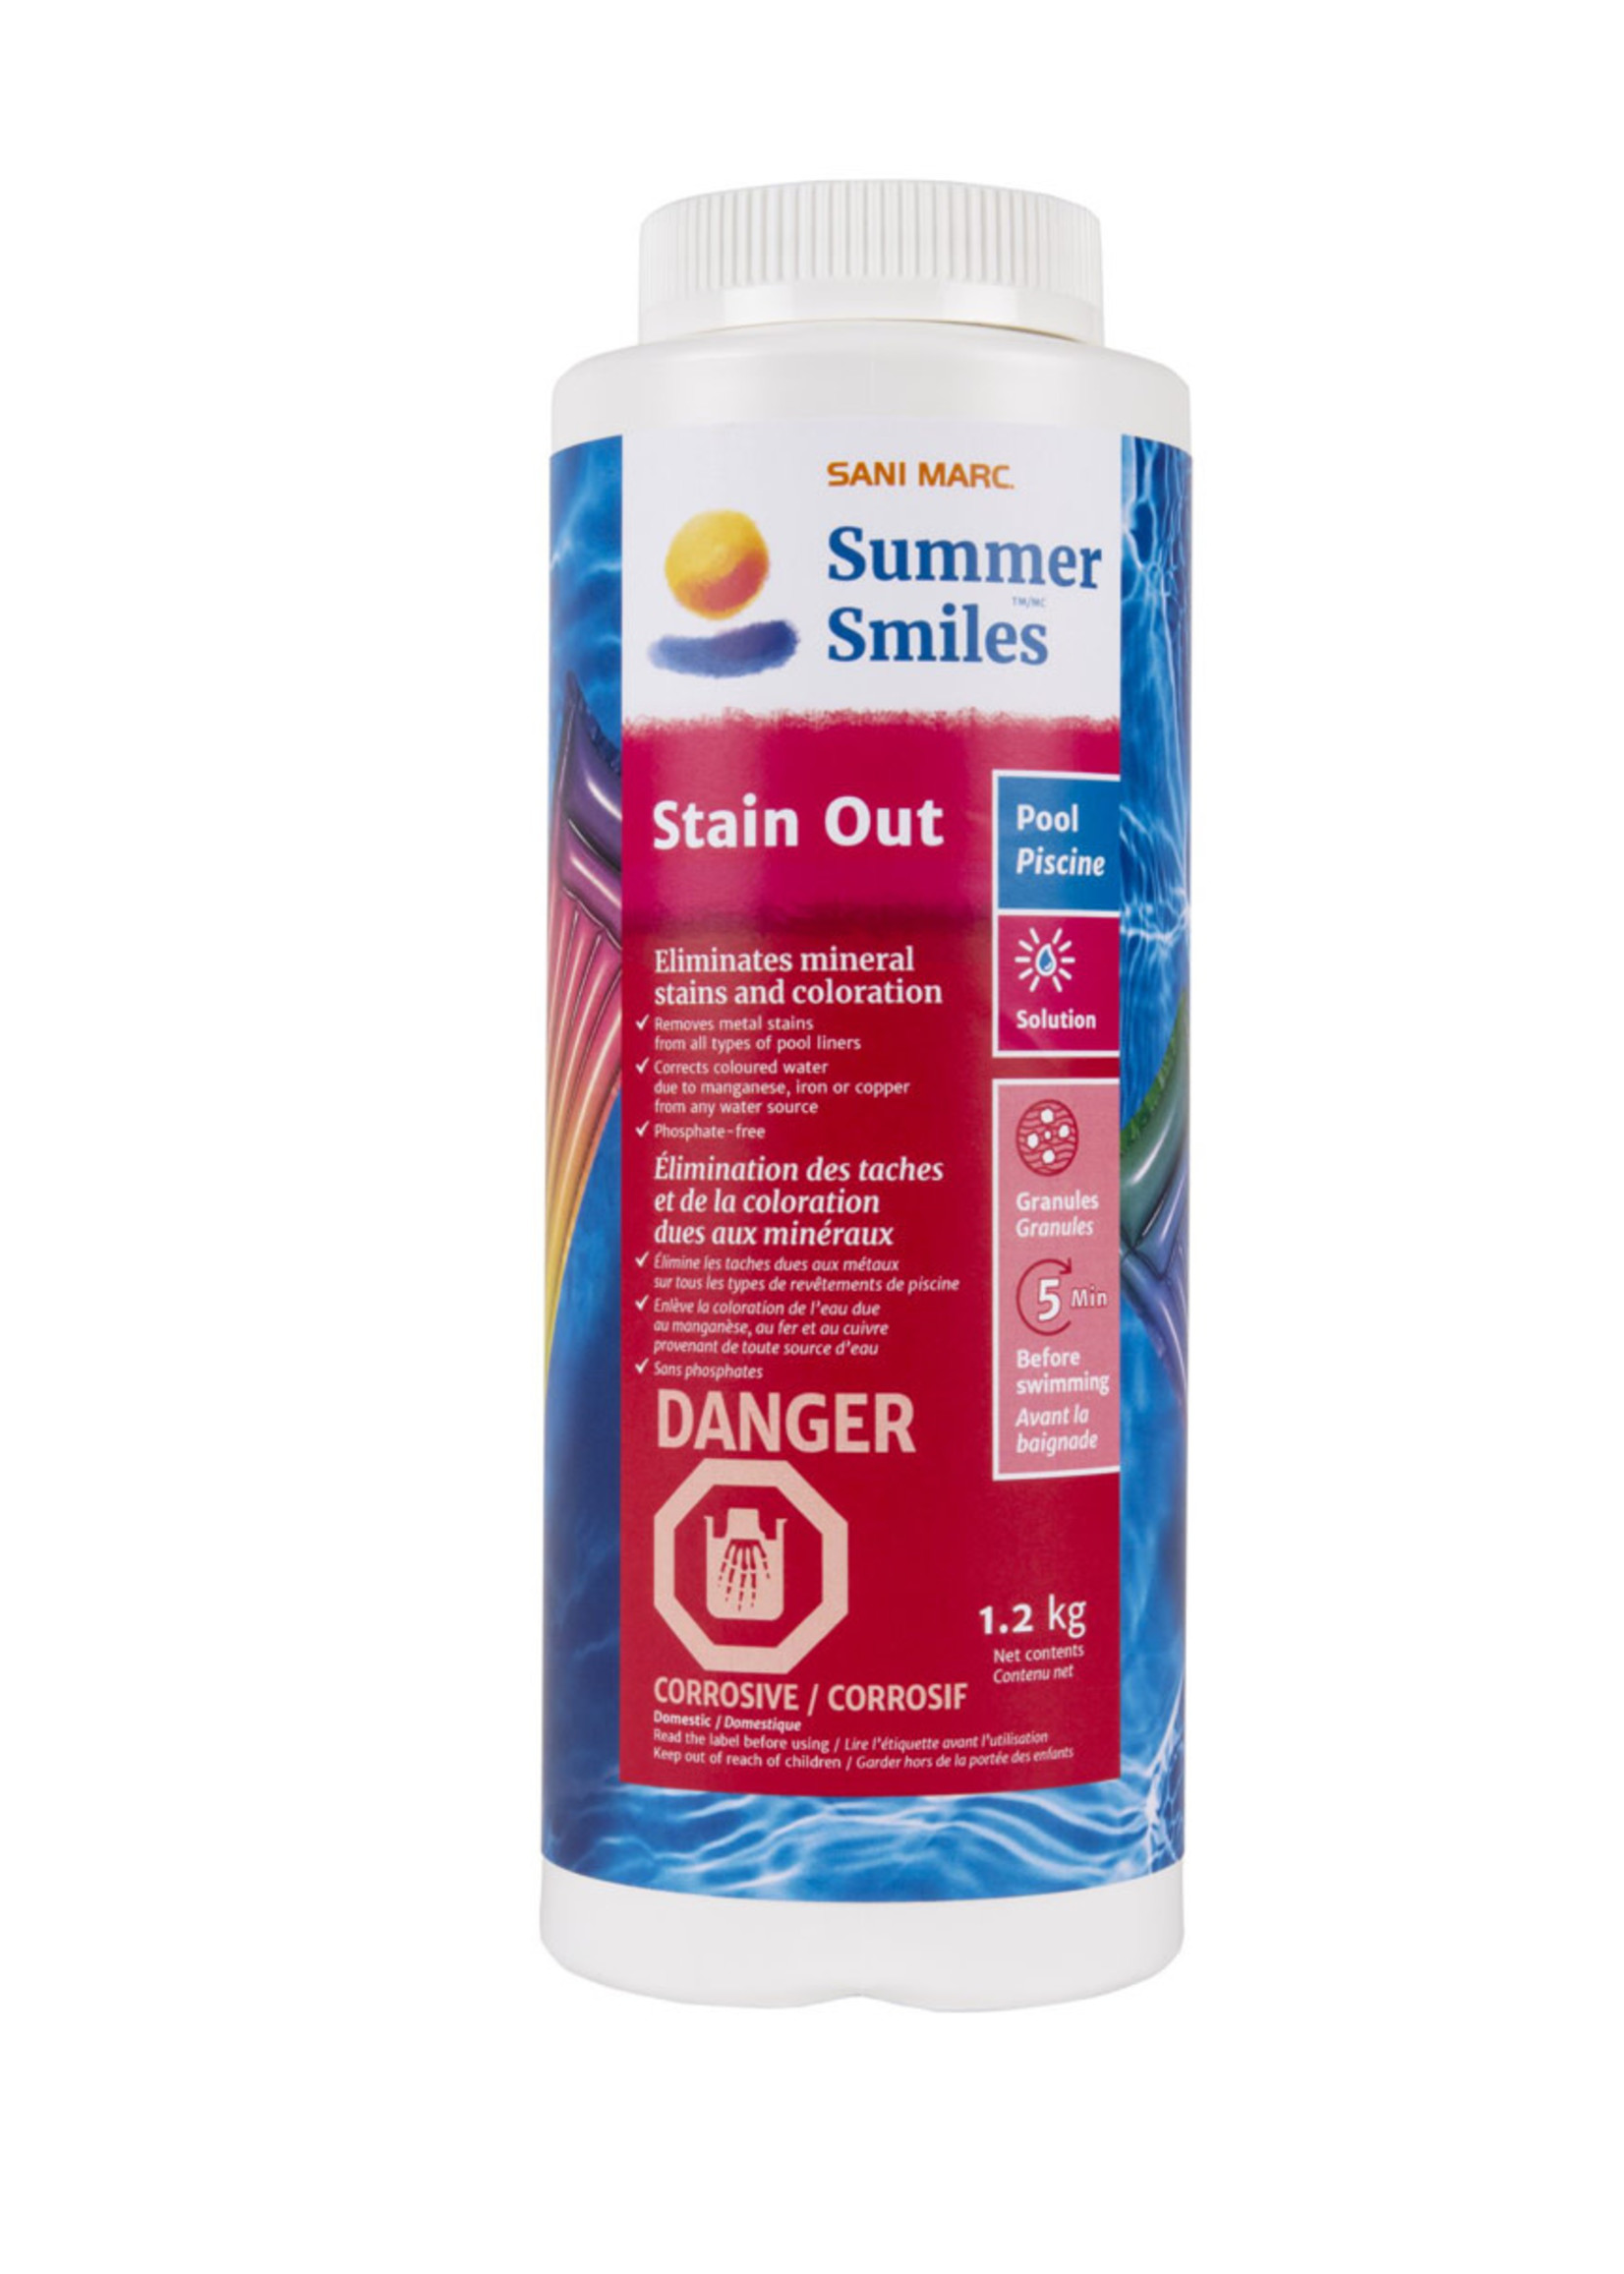 Sani Marc Summer Smiles Stain Out 1.2kg